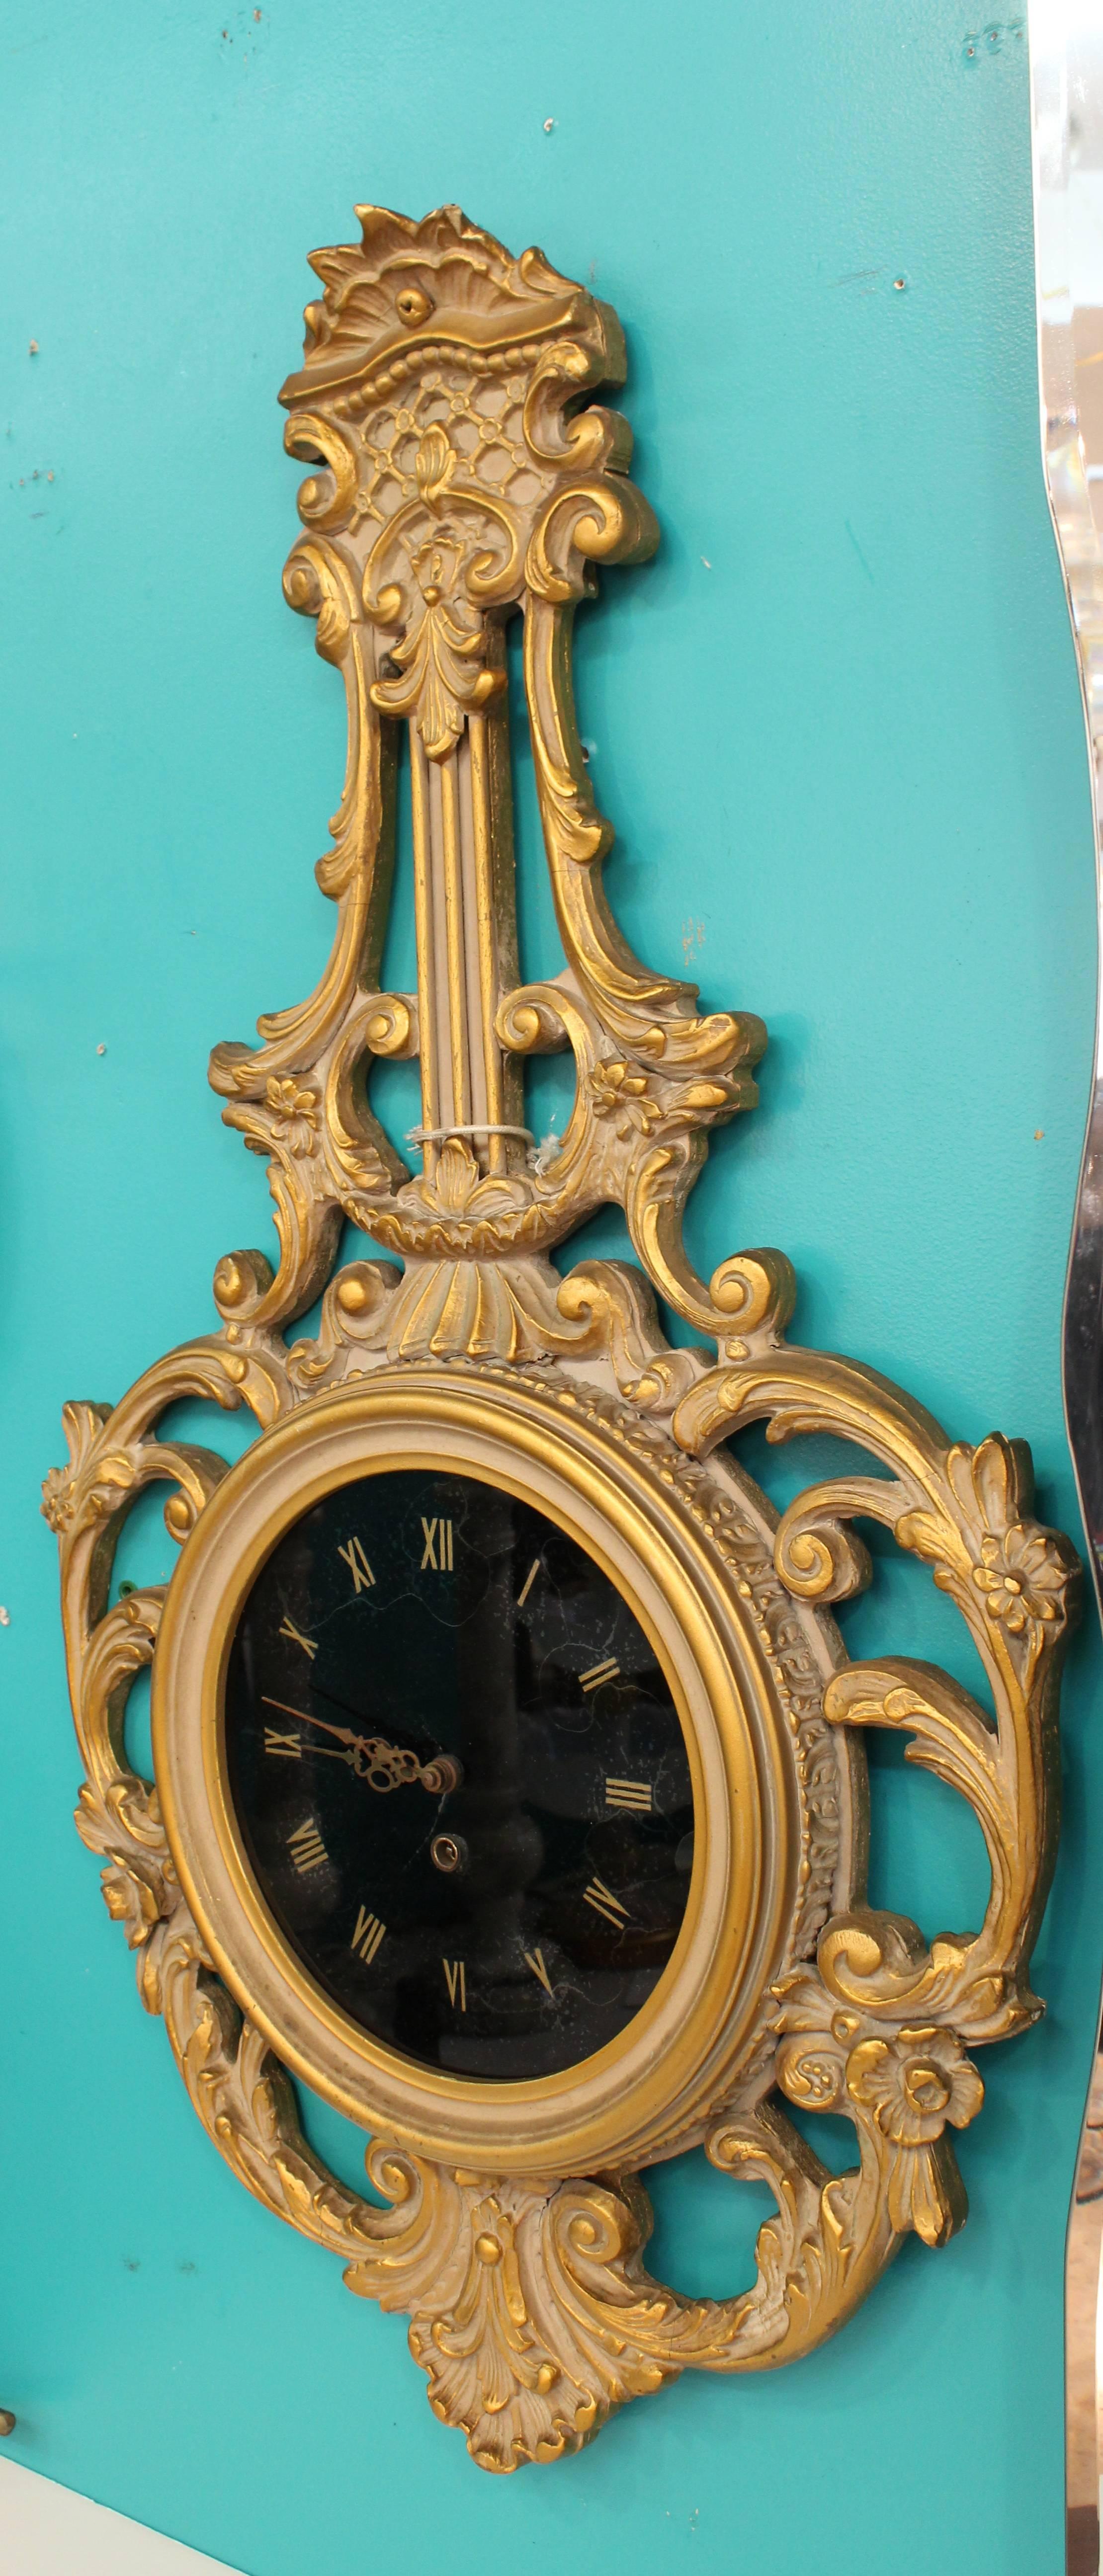 A decorative black glass clock with églomisé roman numerals. The piece is held in an elaborately carved drop frame. The clock winds up with key. In good condition. 